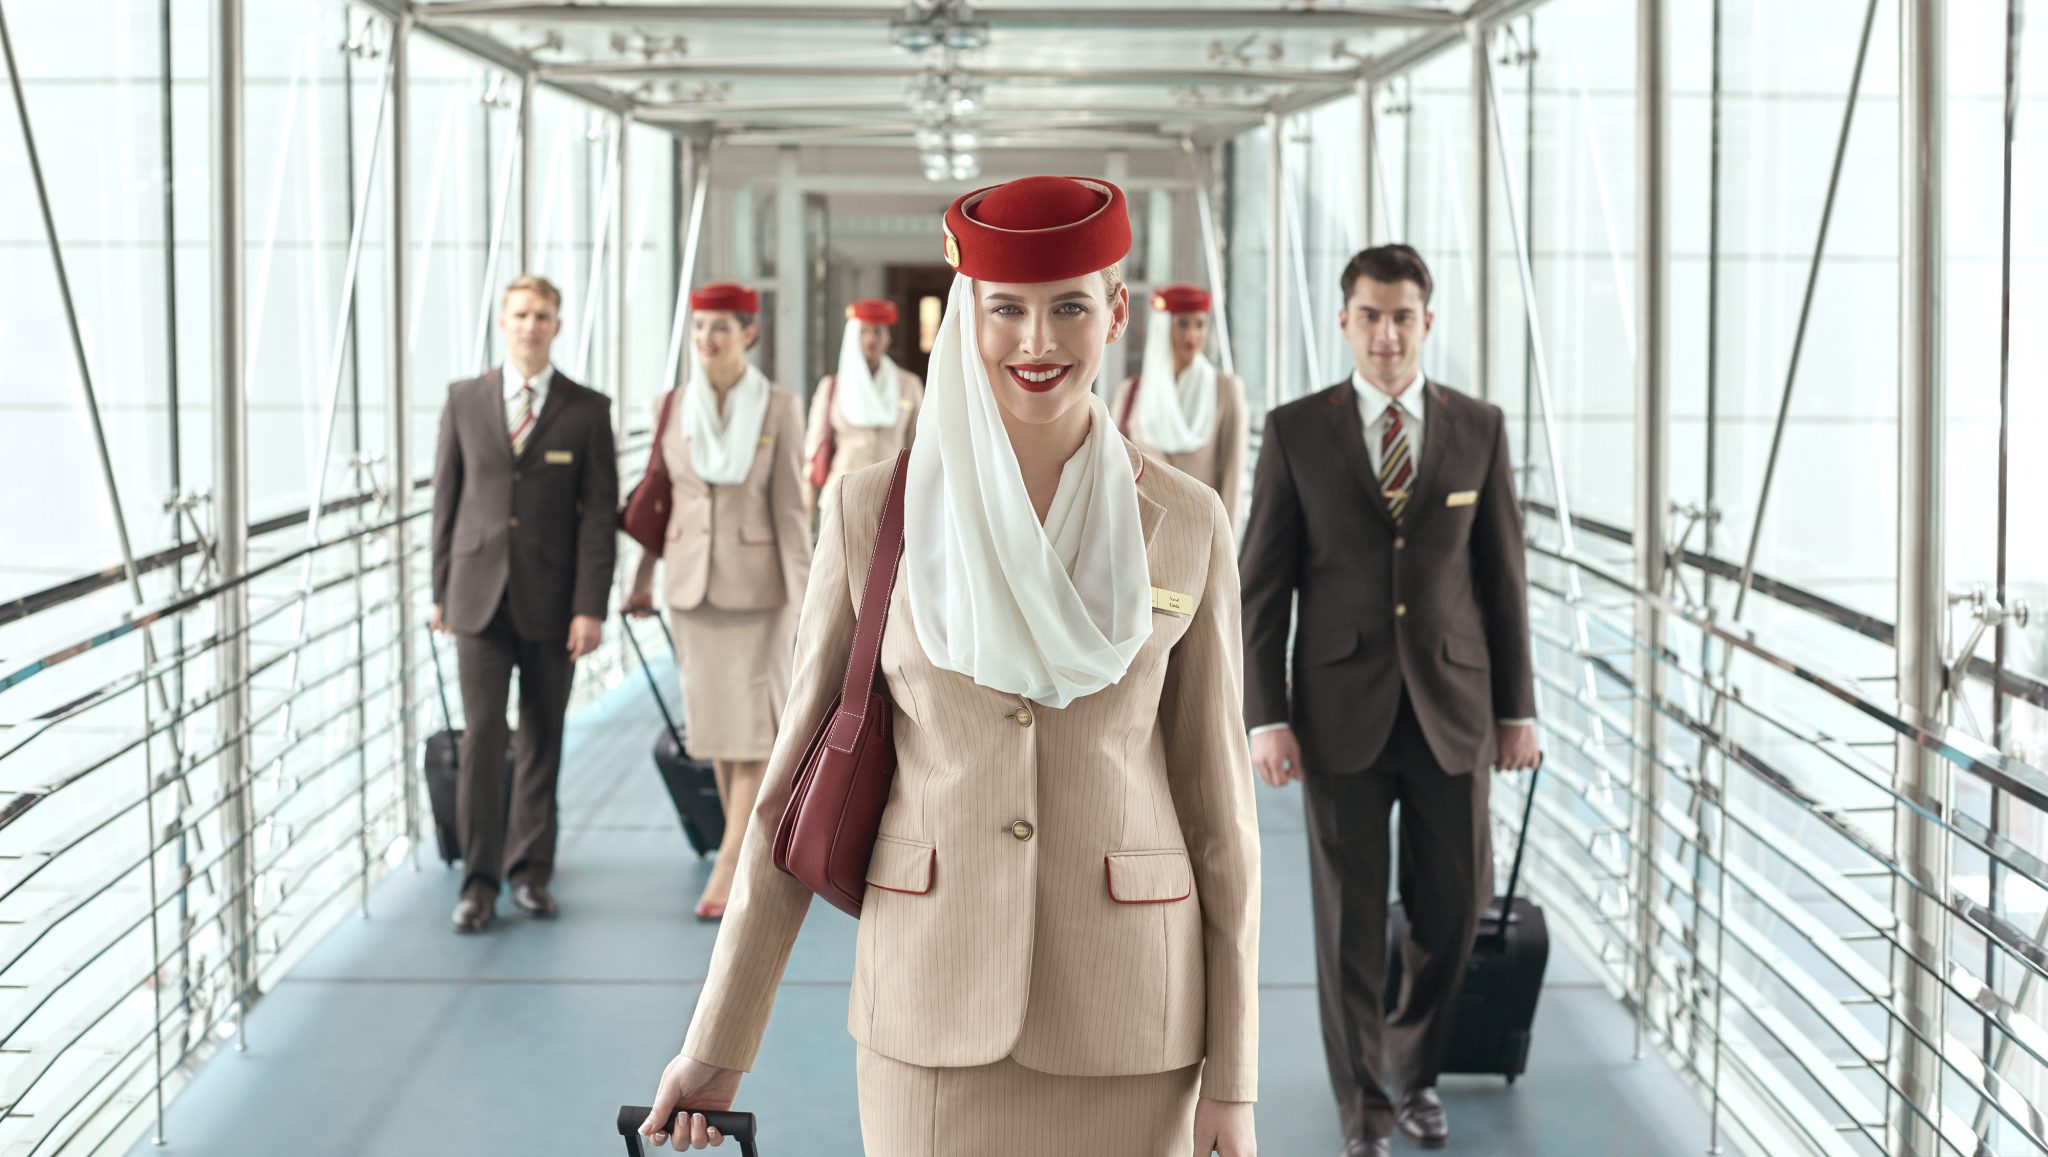 Did Emirates Really Warn Cabin Crew They Face Disciplinary Action for "Facial Enhancements"?